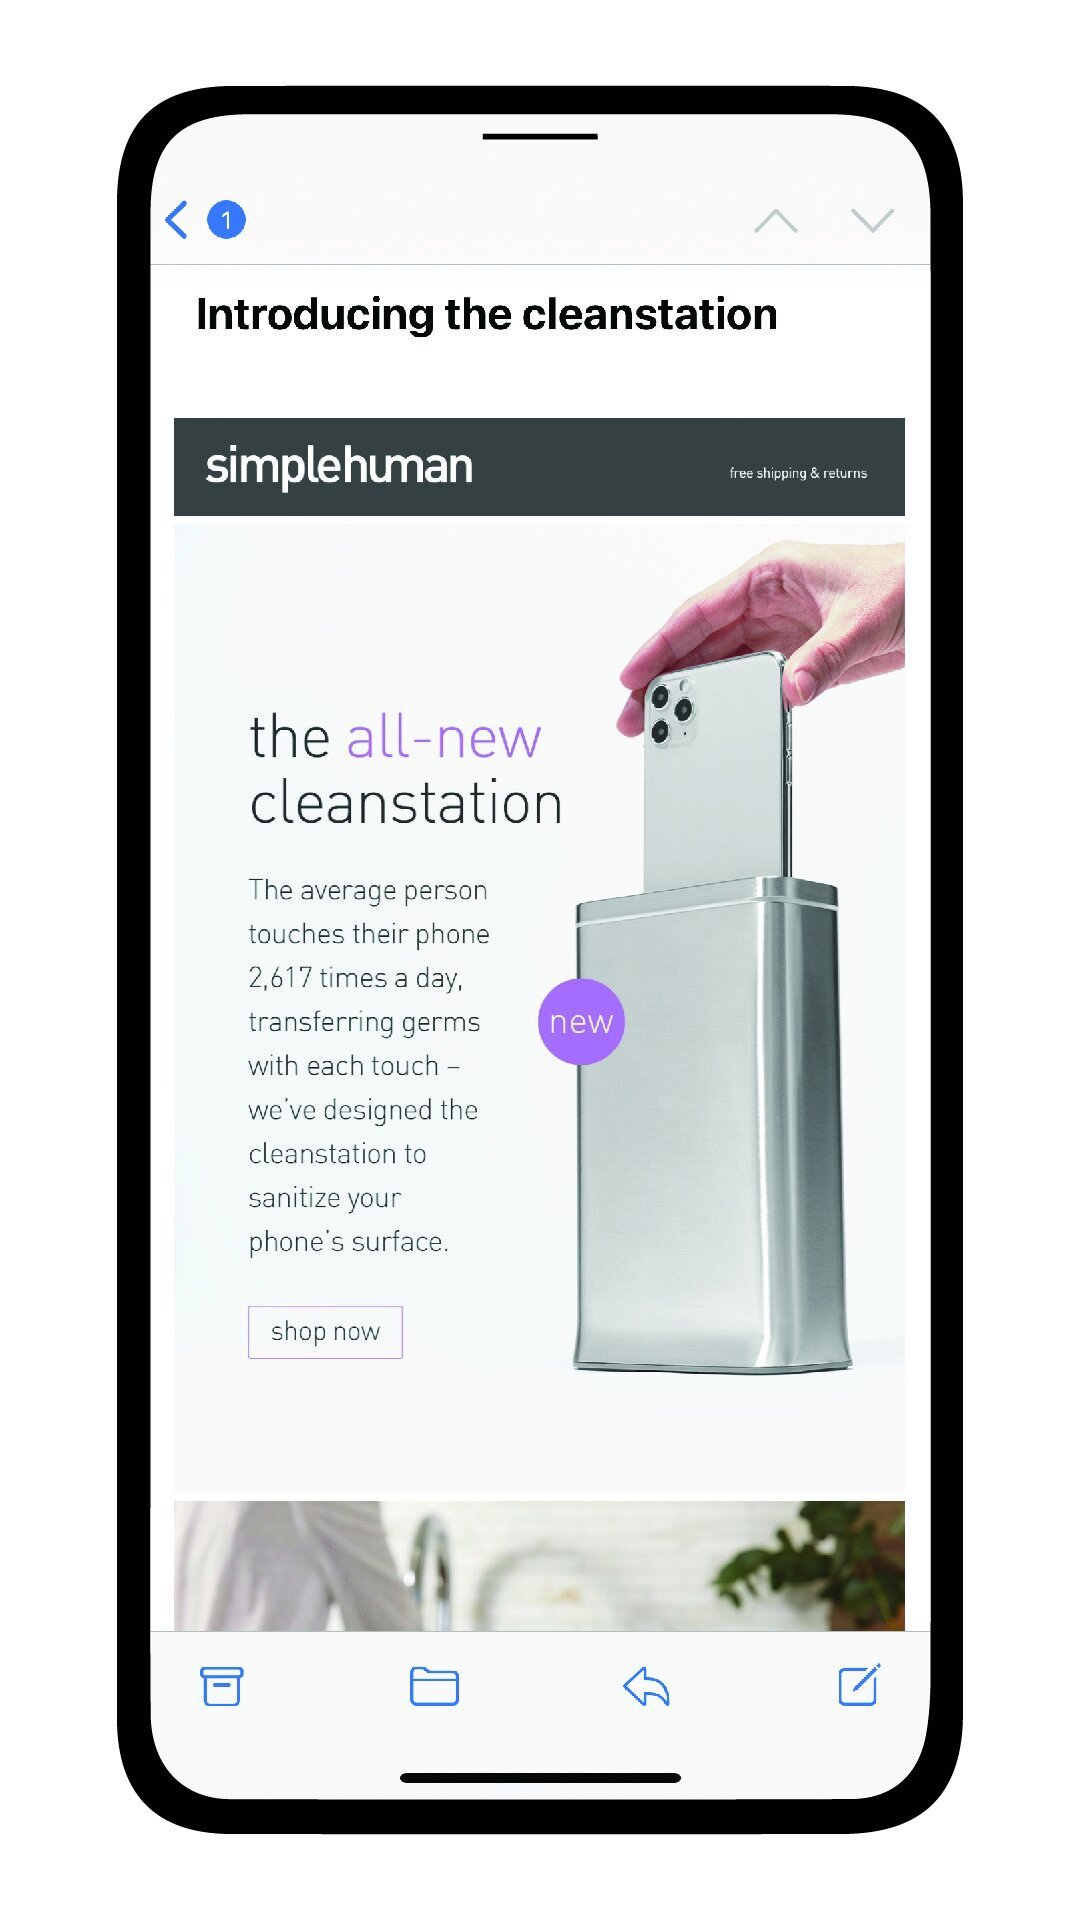 cleanstation+email-1.jpg